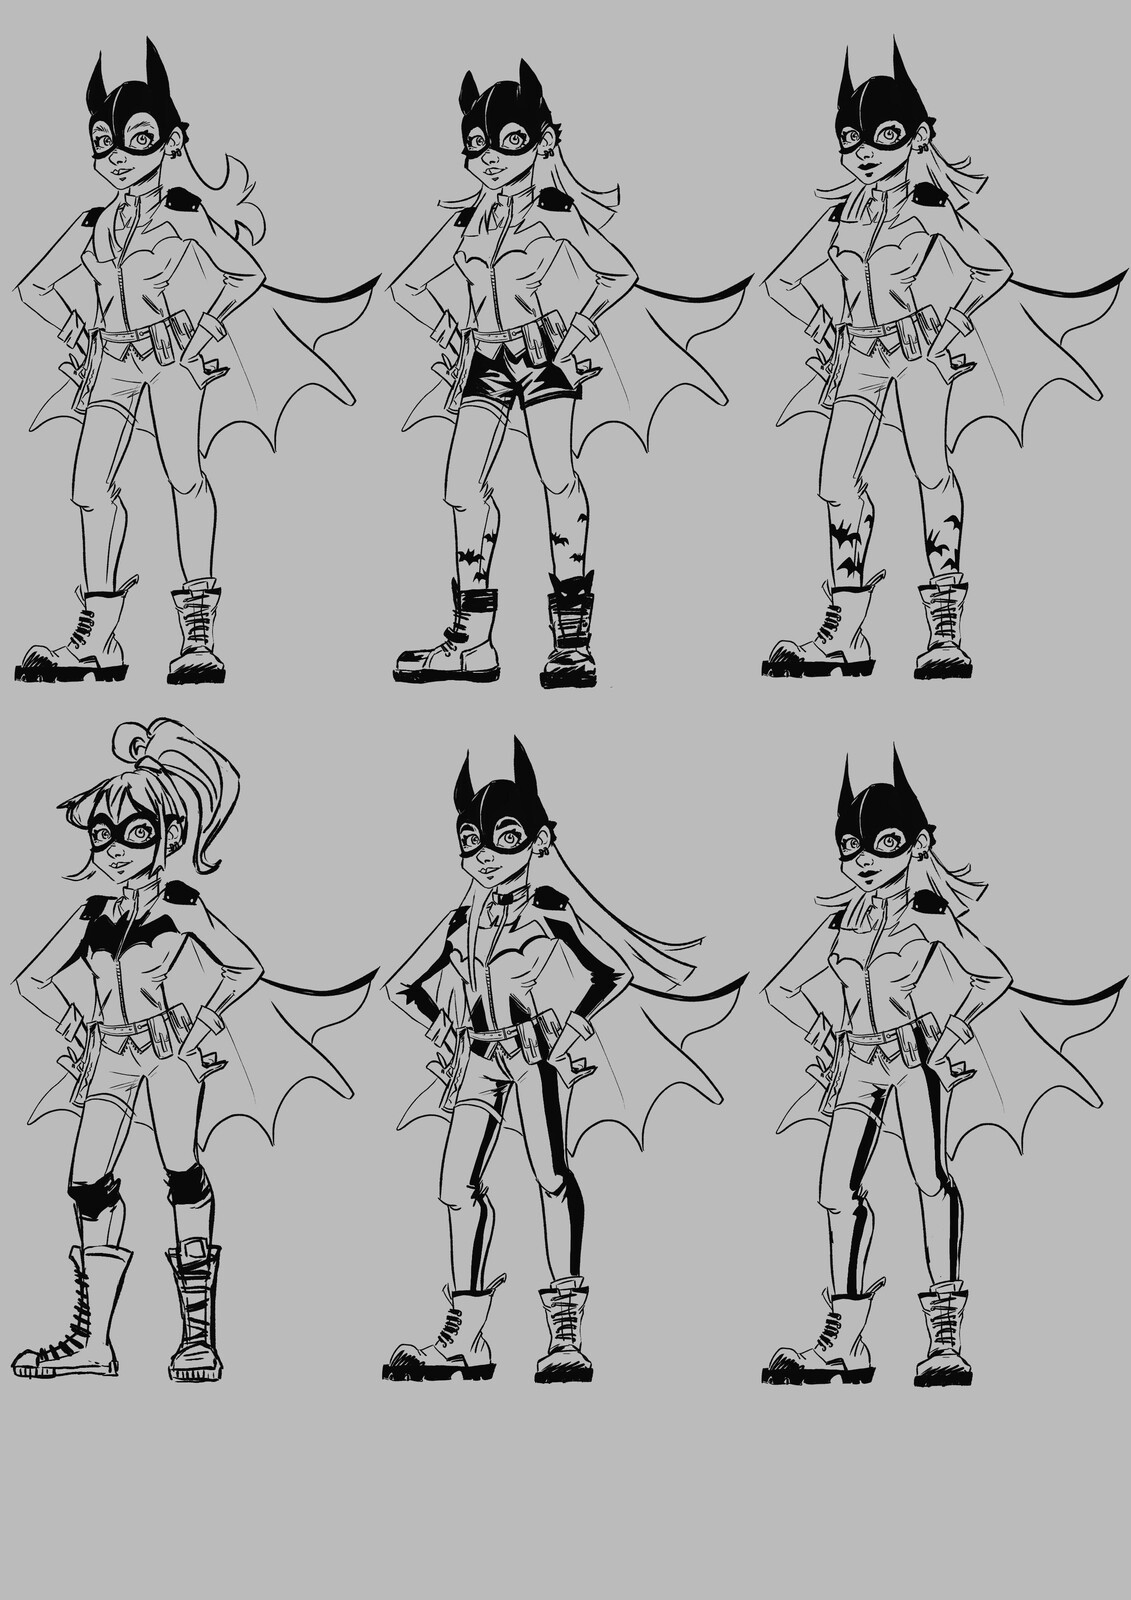 Thumbnails and costume variations.